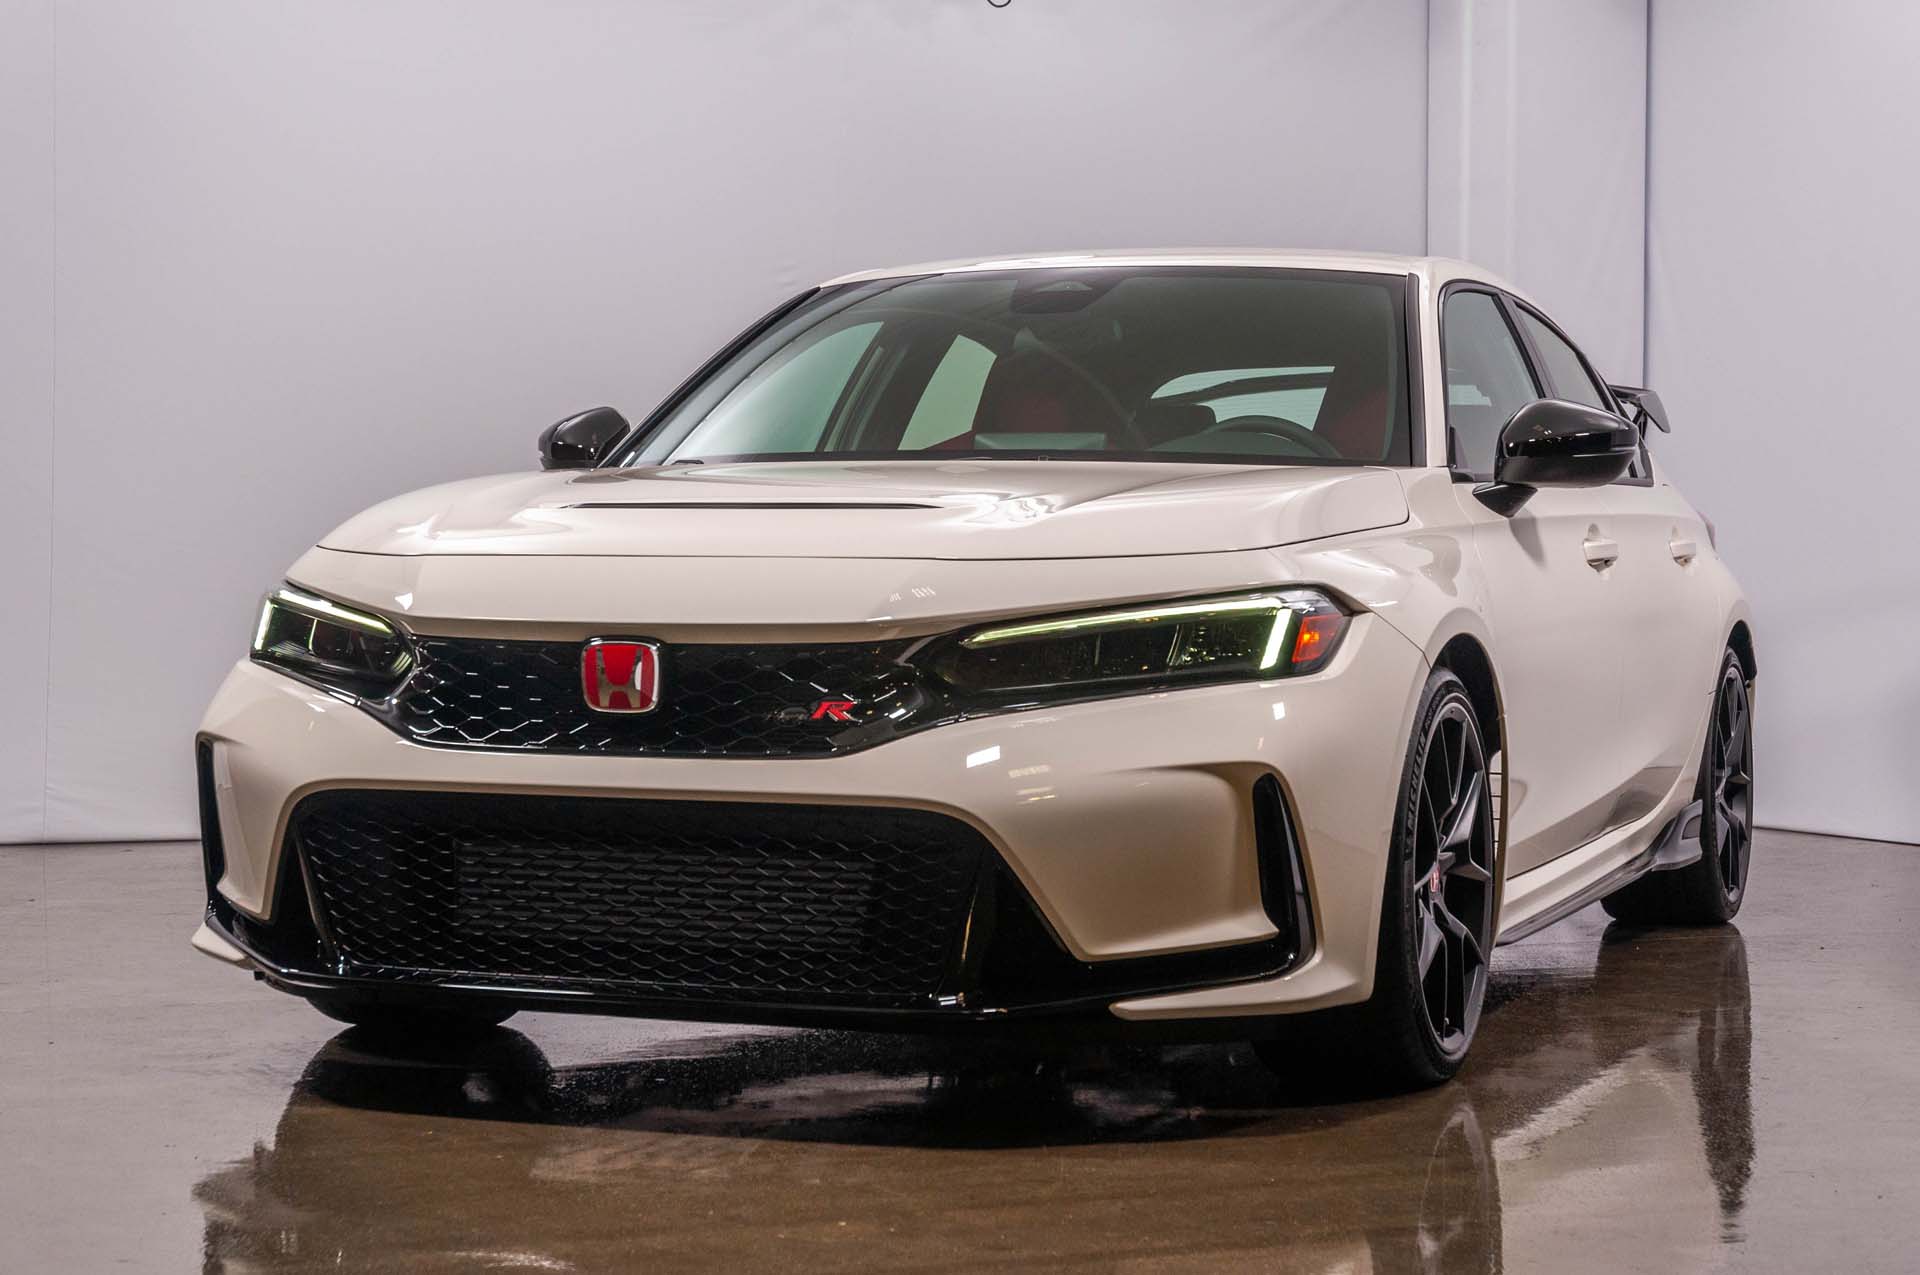 What Do We Know about the All-New 2023 Honda Civic Type R?